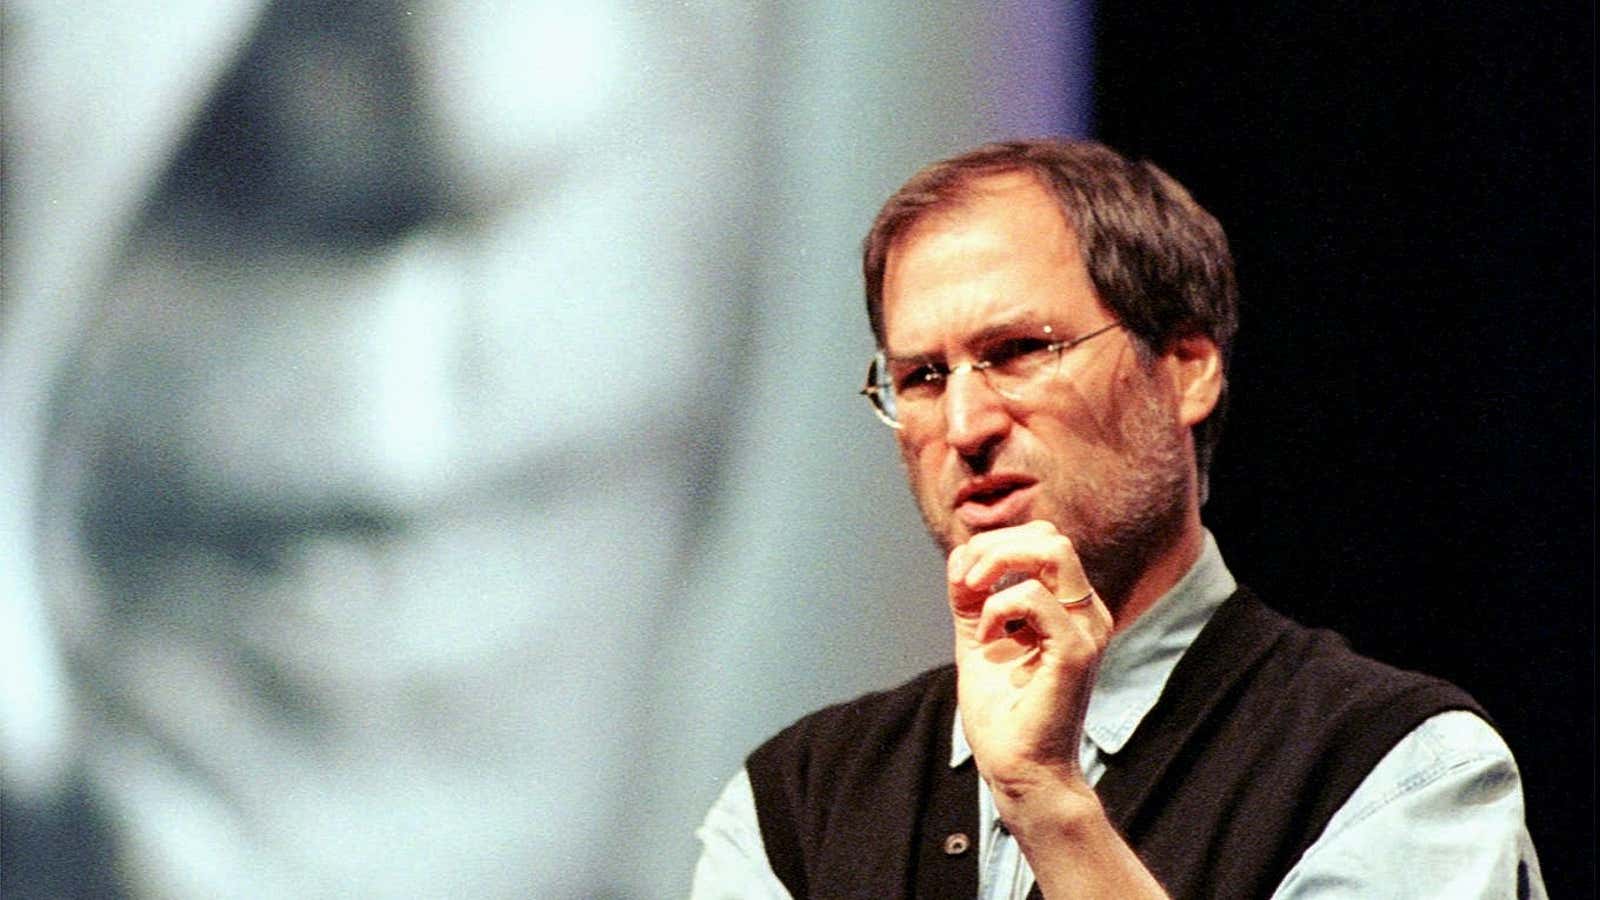 Even Walter Isaacson’s best-selling biography of Jobs got it wrong, says the designer who lived it.